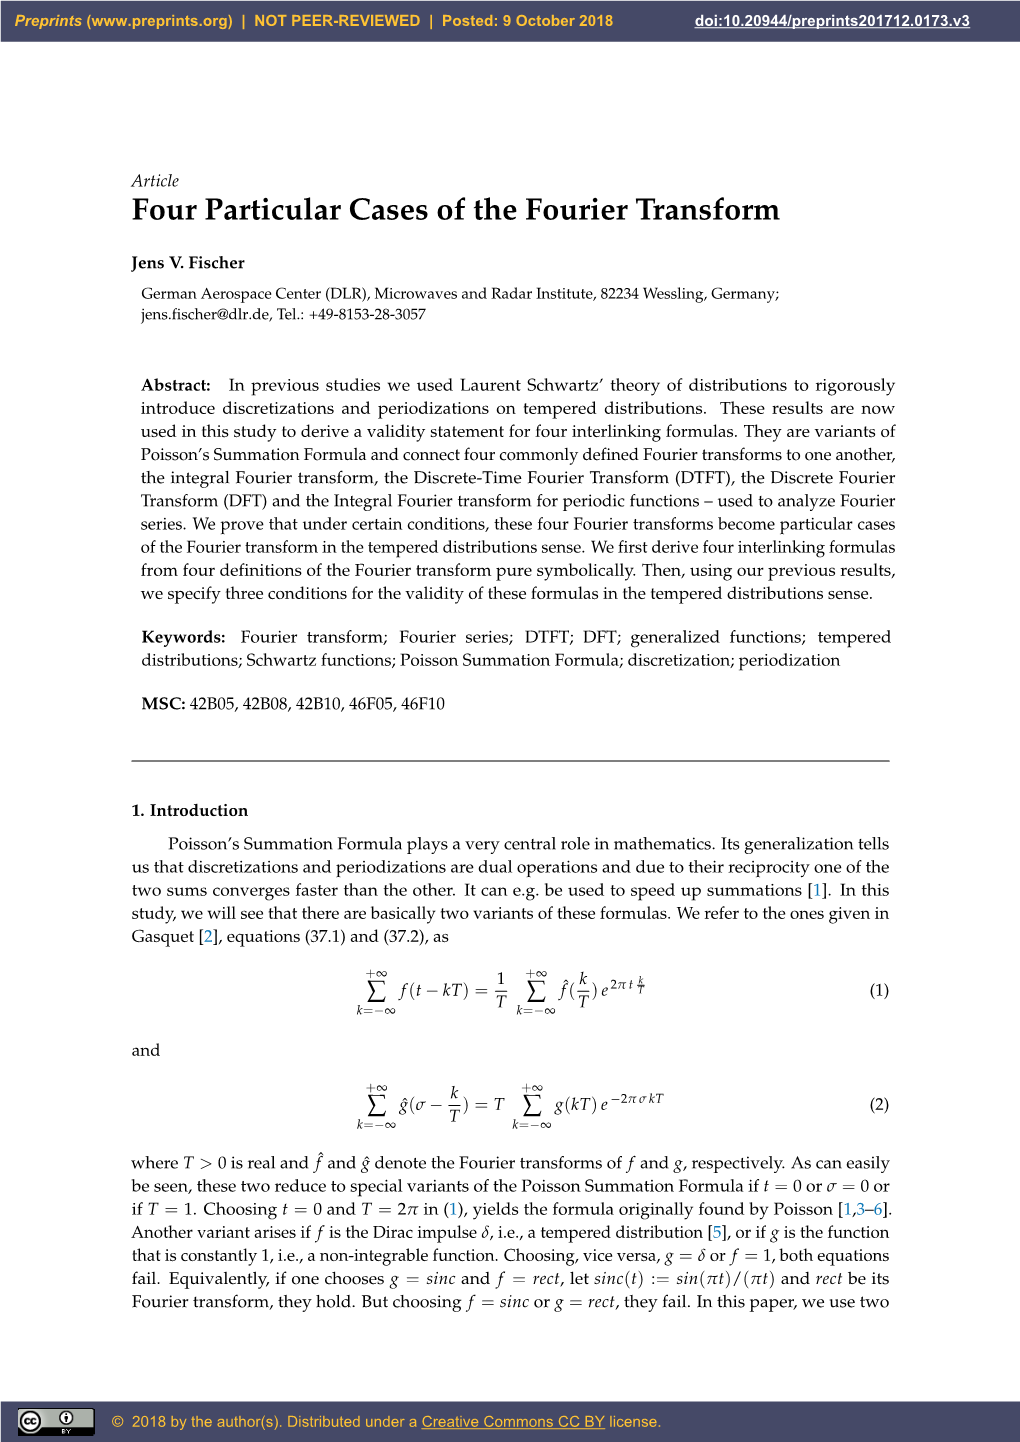 Four Particular Cases of the Fourier Transform